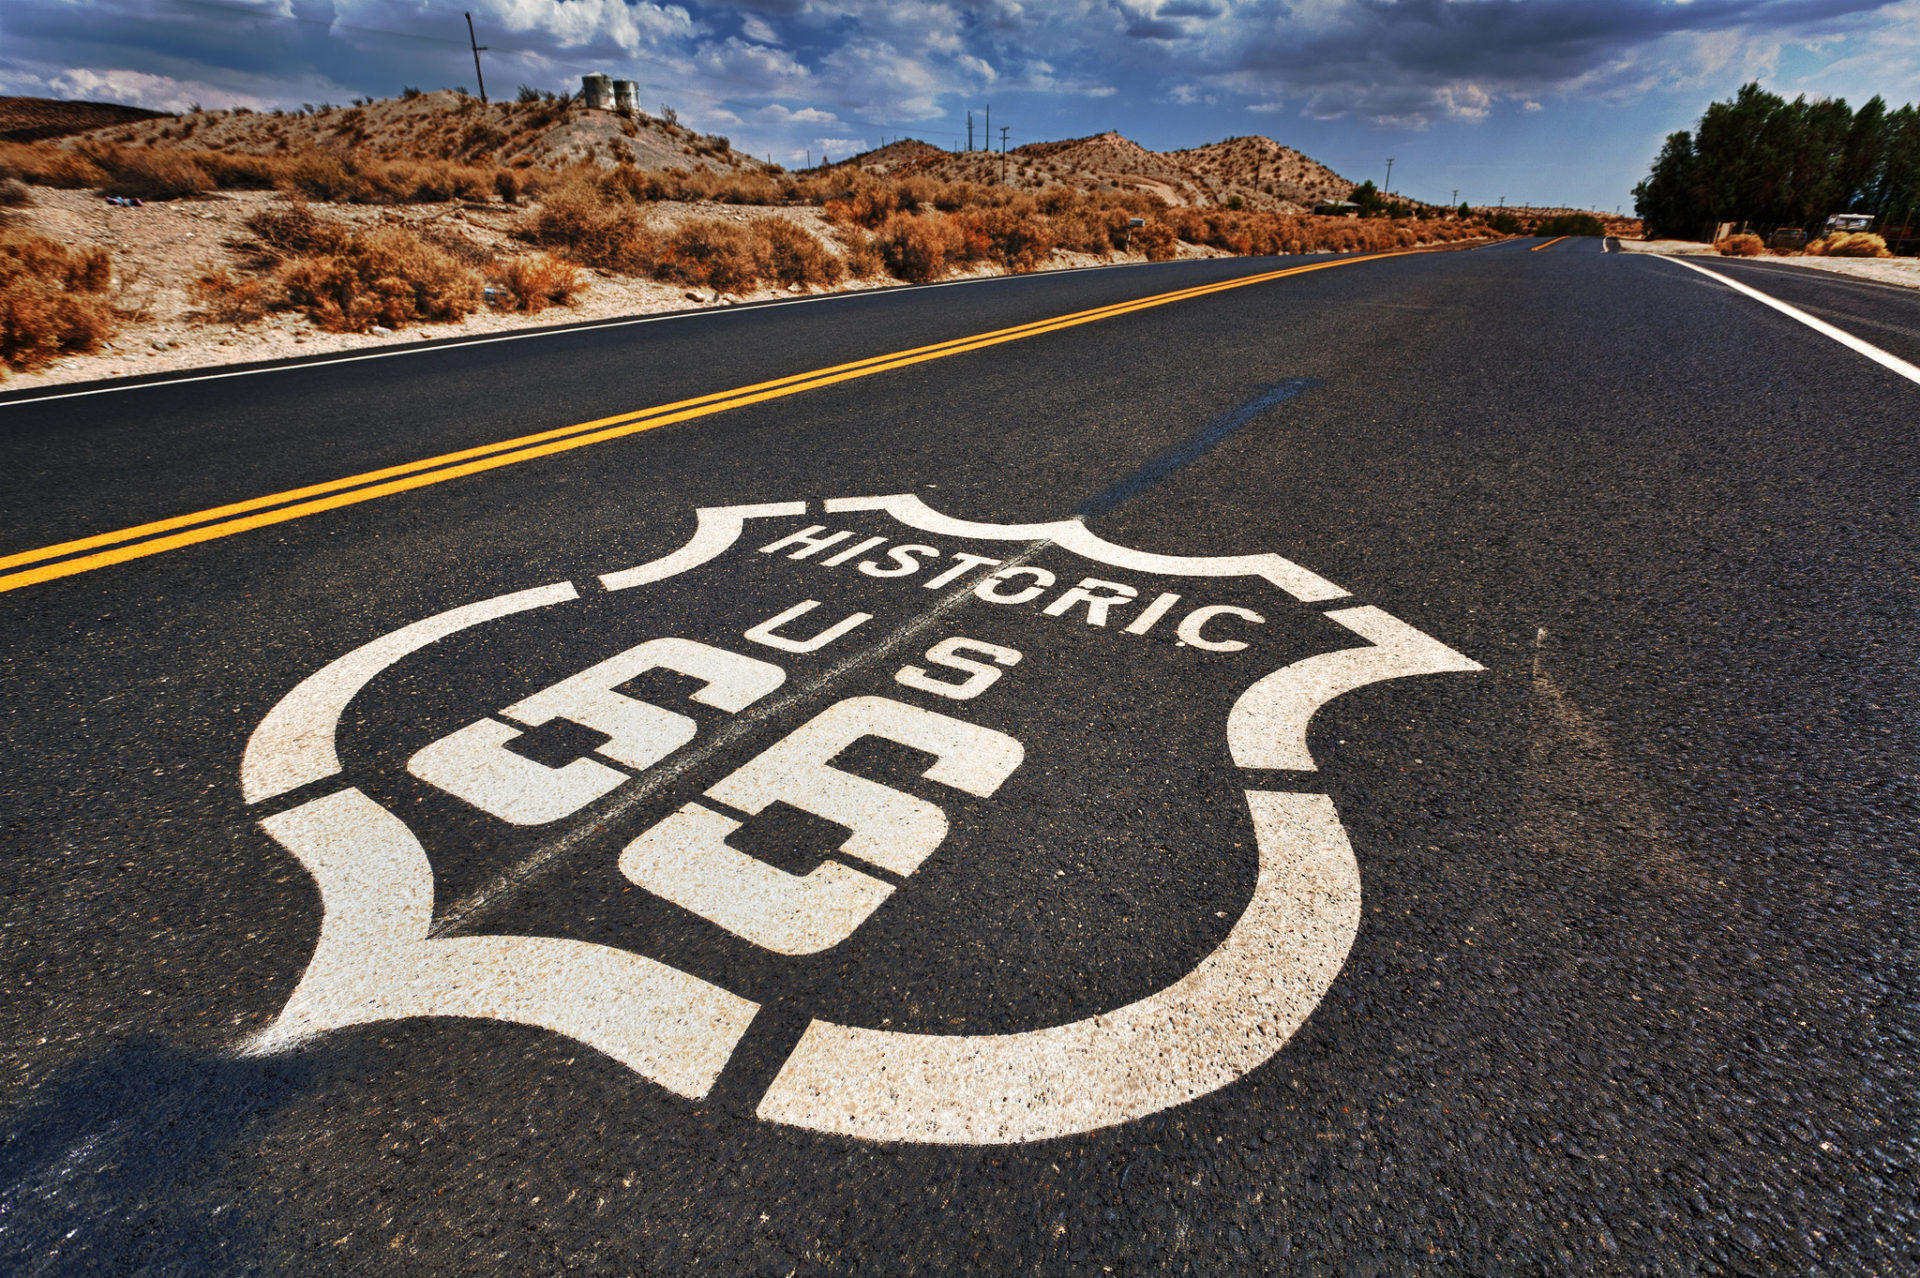 Episode 45 — Get Your Kicks on Route 66